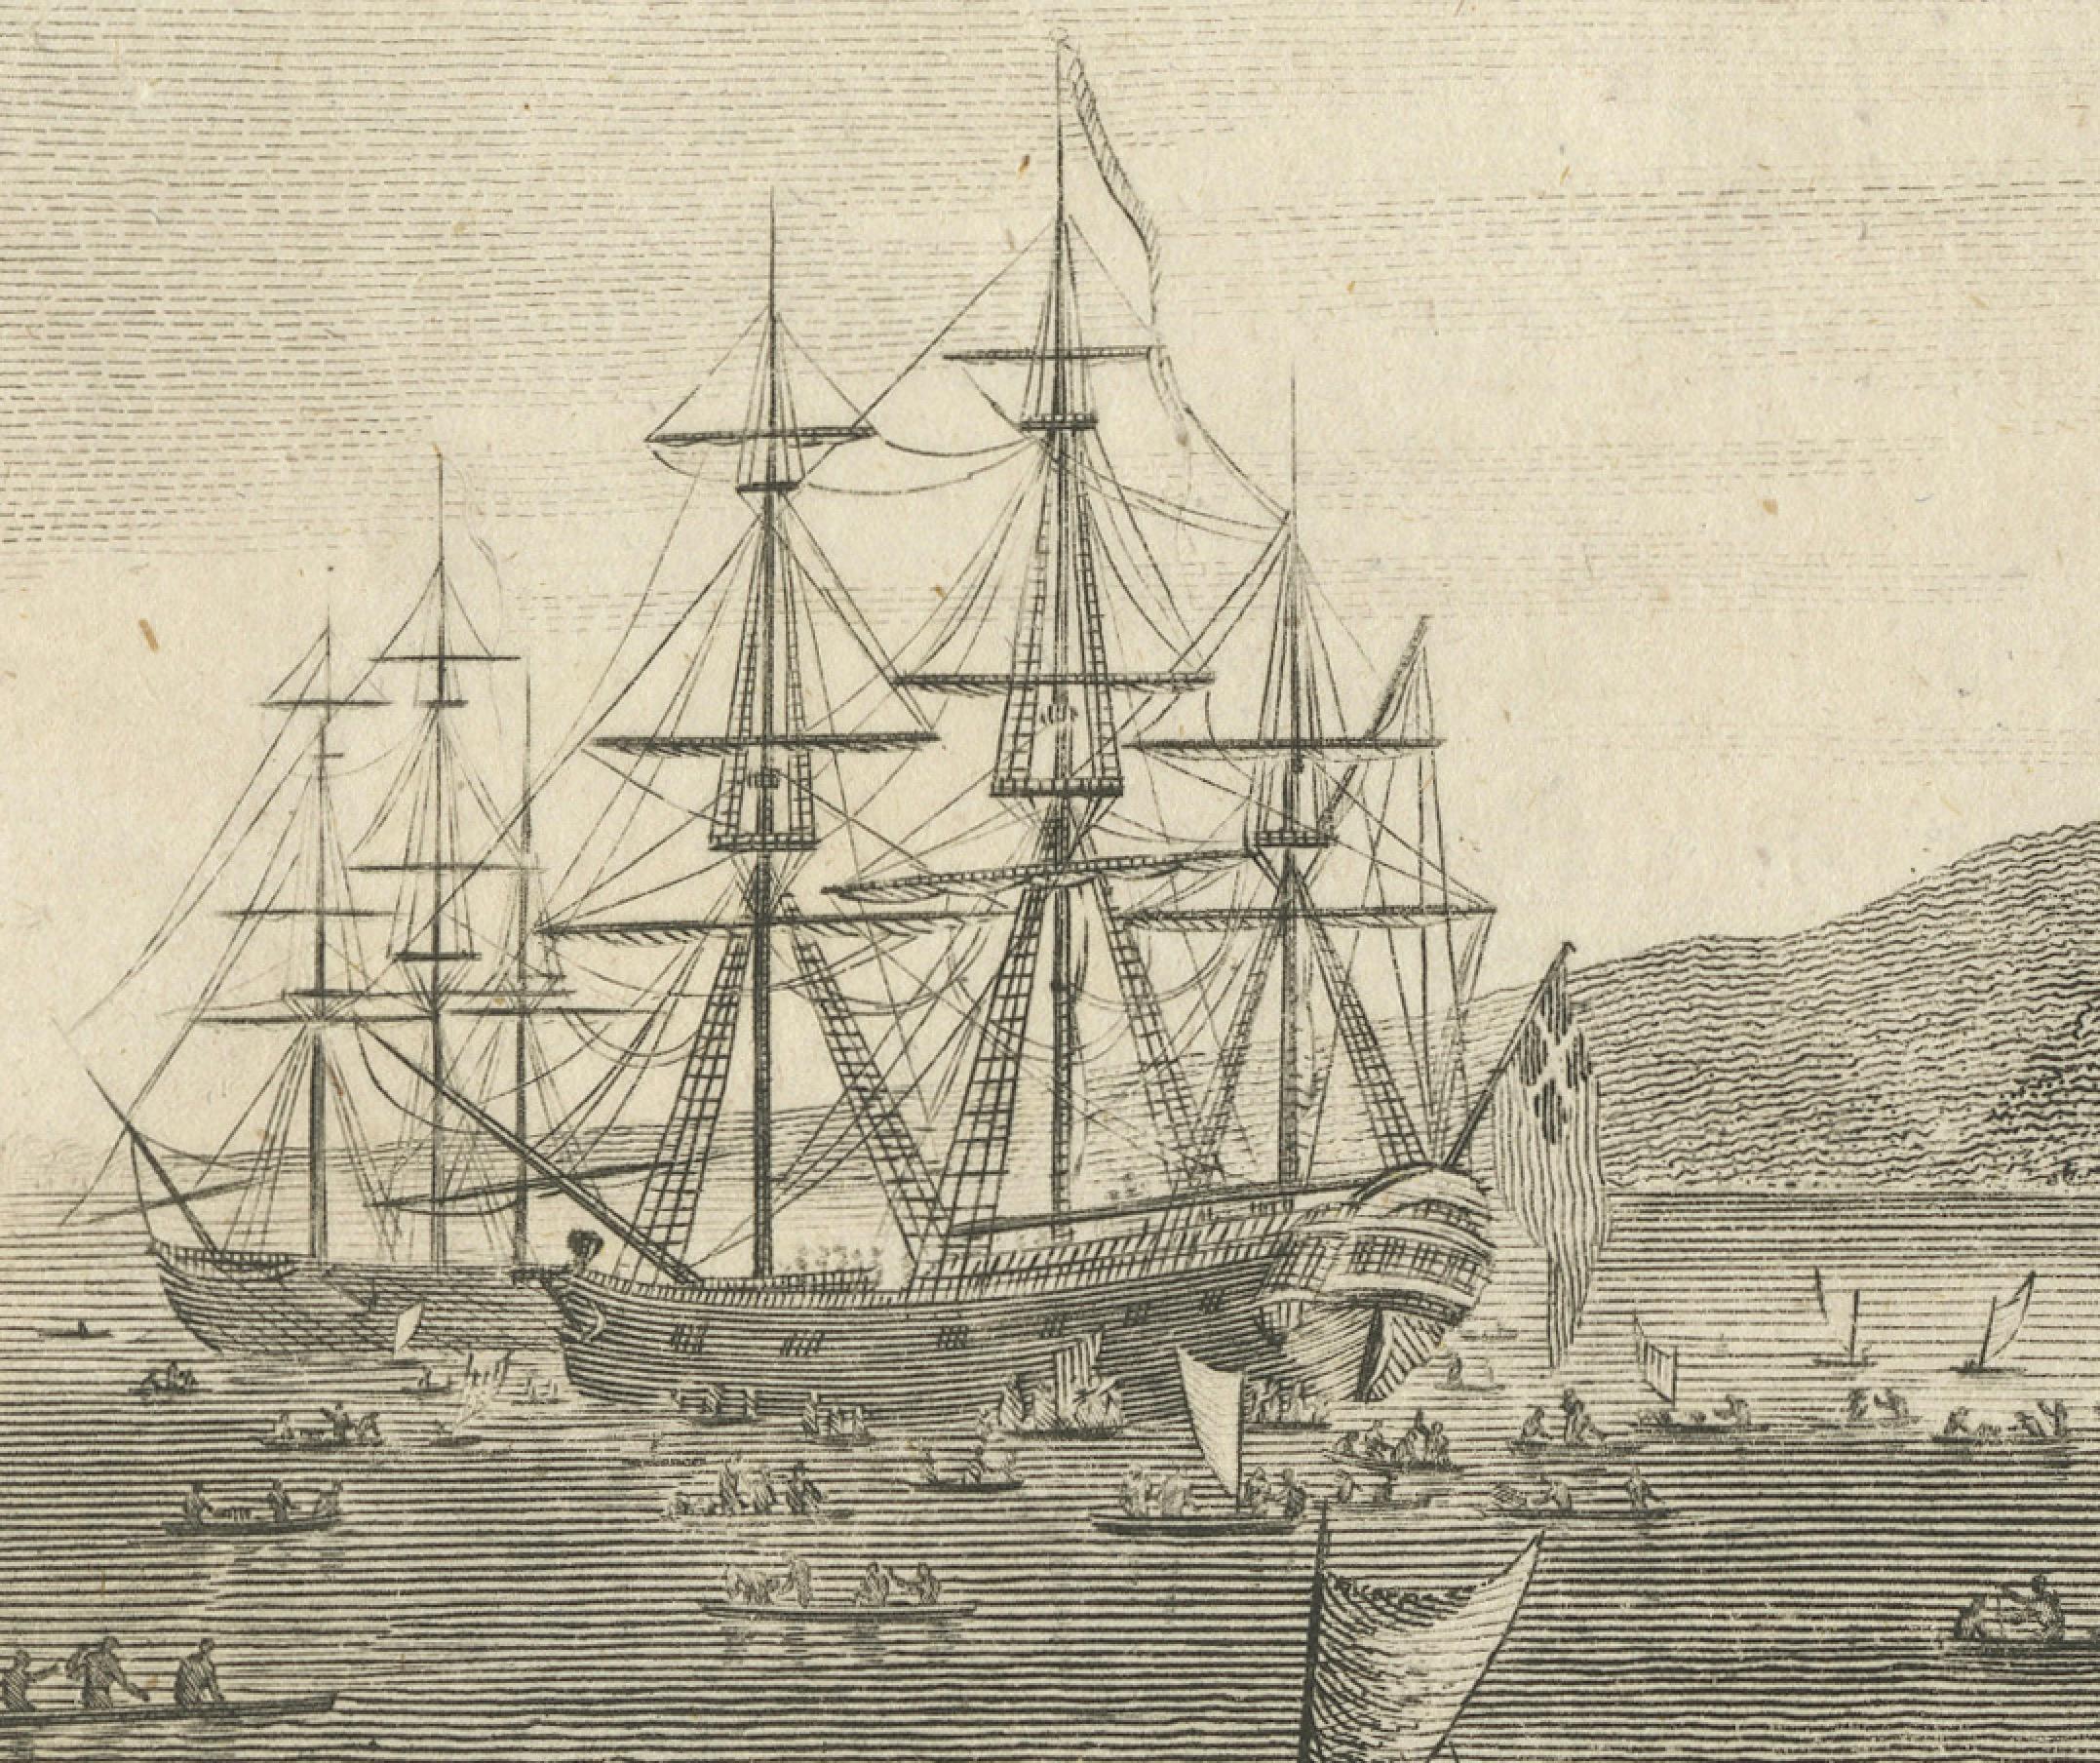 Copper engraving from Thomas Bankes’s “New System of Geography” published by Royal Authority c.1775

This engraving for sale depicts a scene of Karakakooa Bay in Owyhee (Hawaii), where Captain James Cook was killed. The image includes a number of